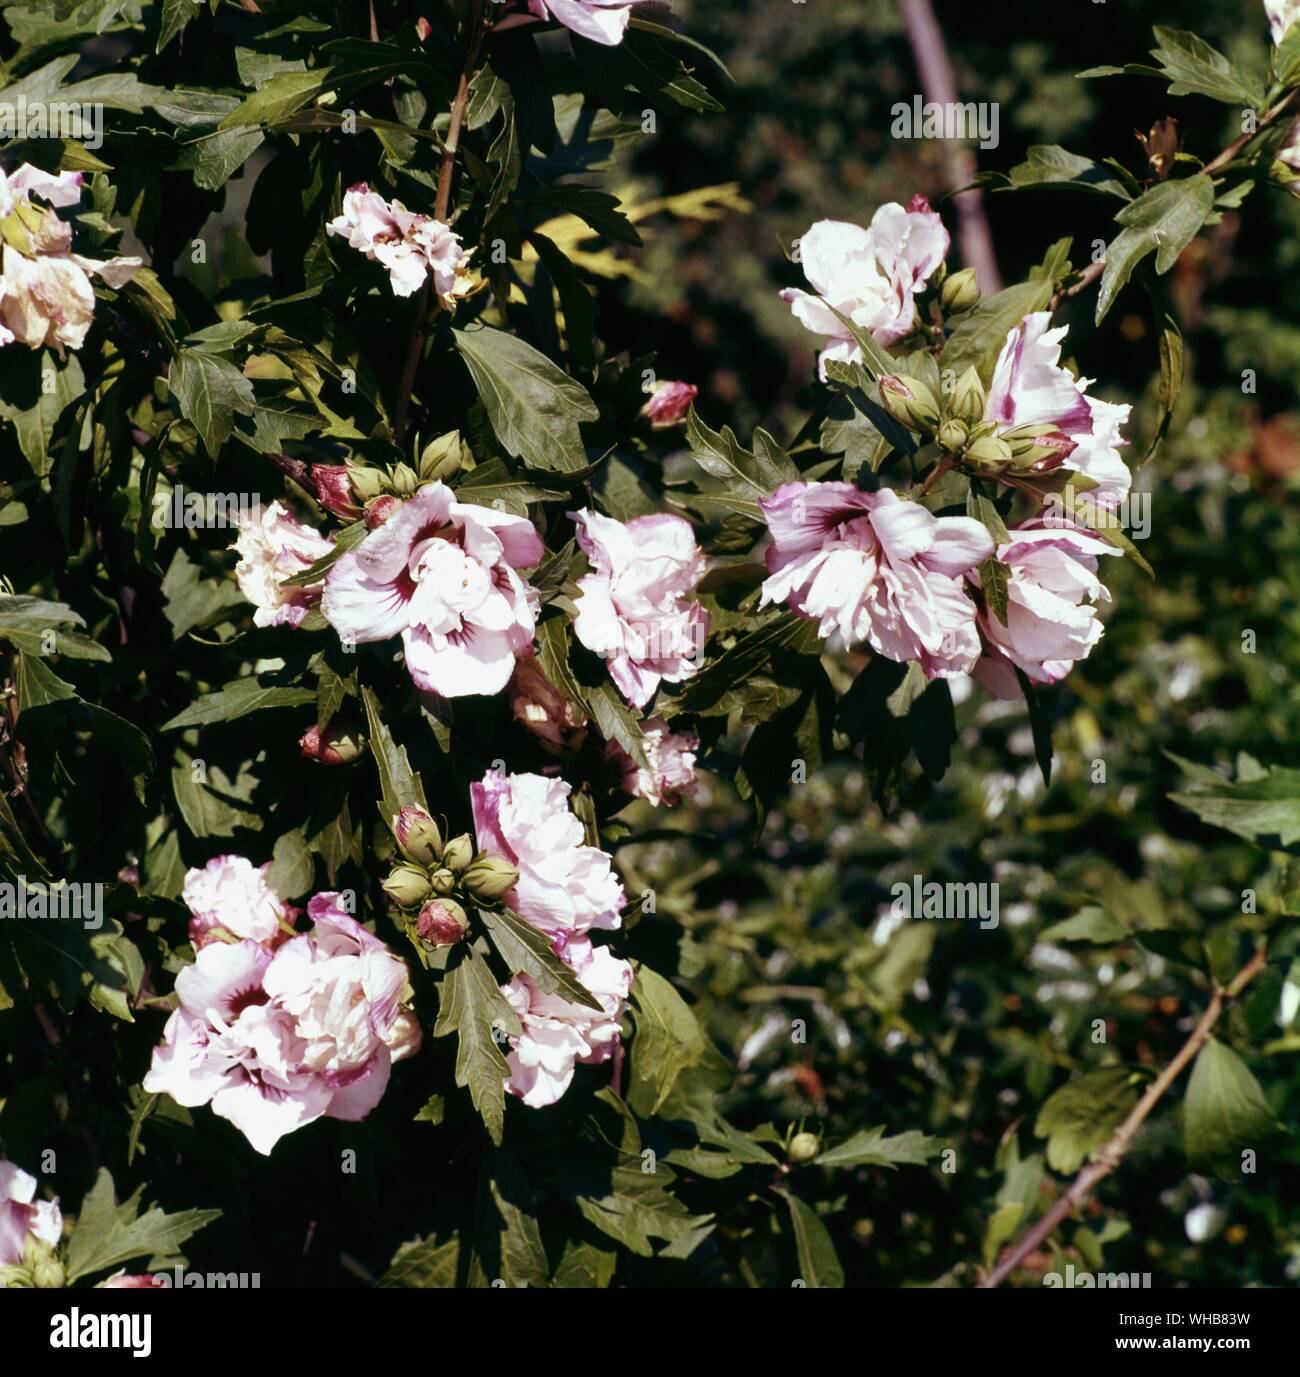 Hibiscus Syriacus Ardens - Ardens Rose of Sharon. Stock Photo